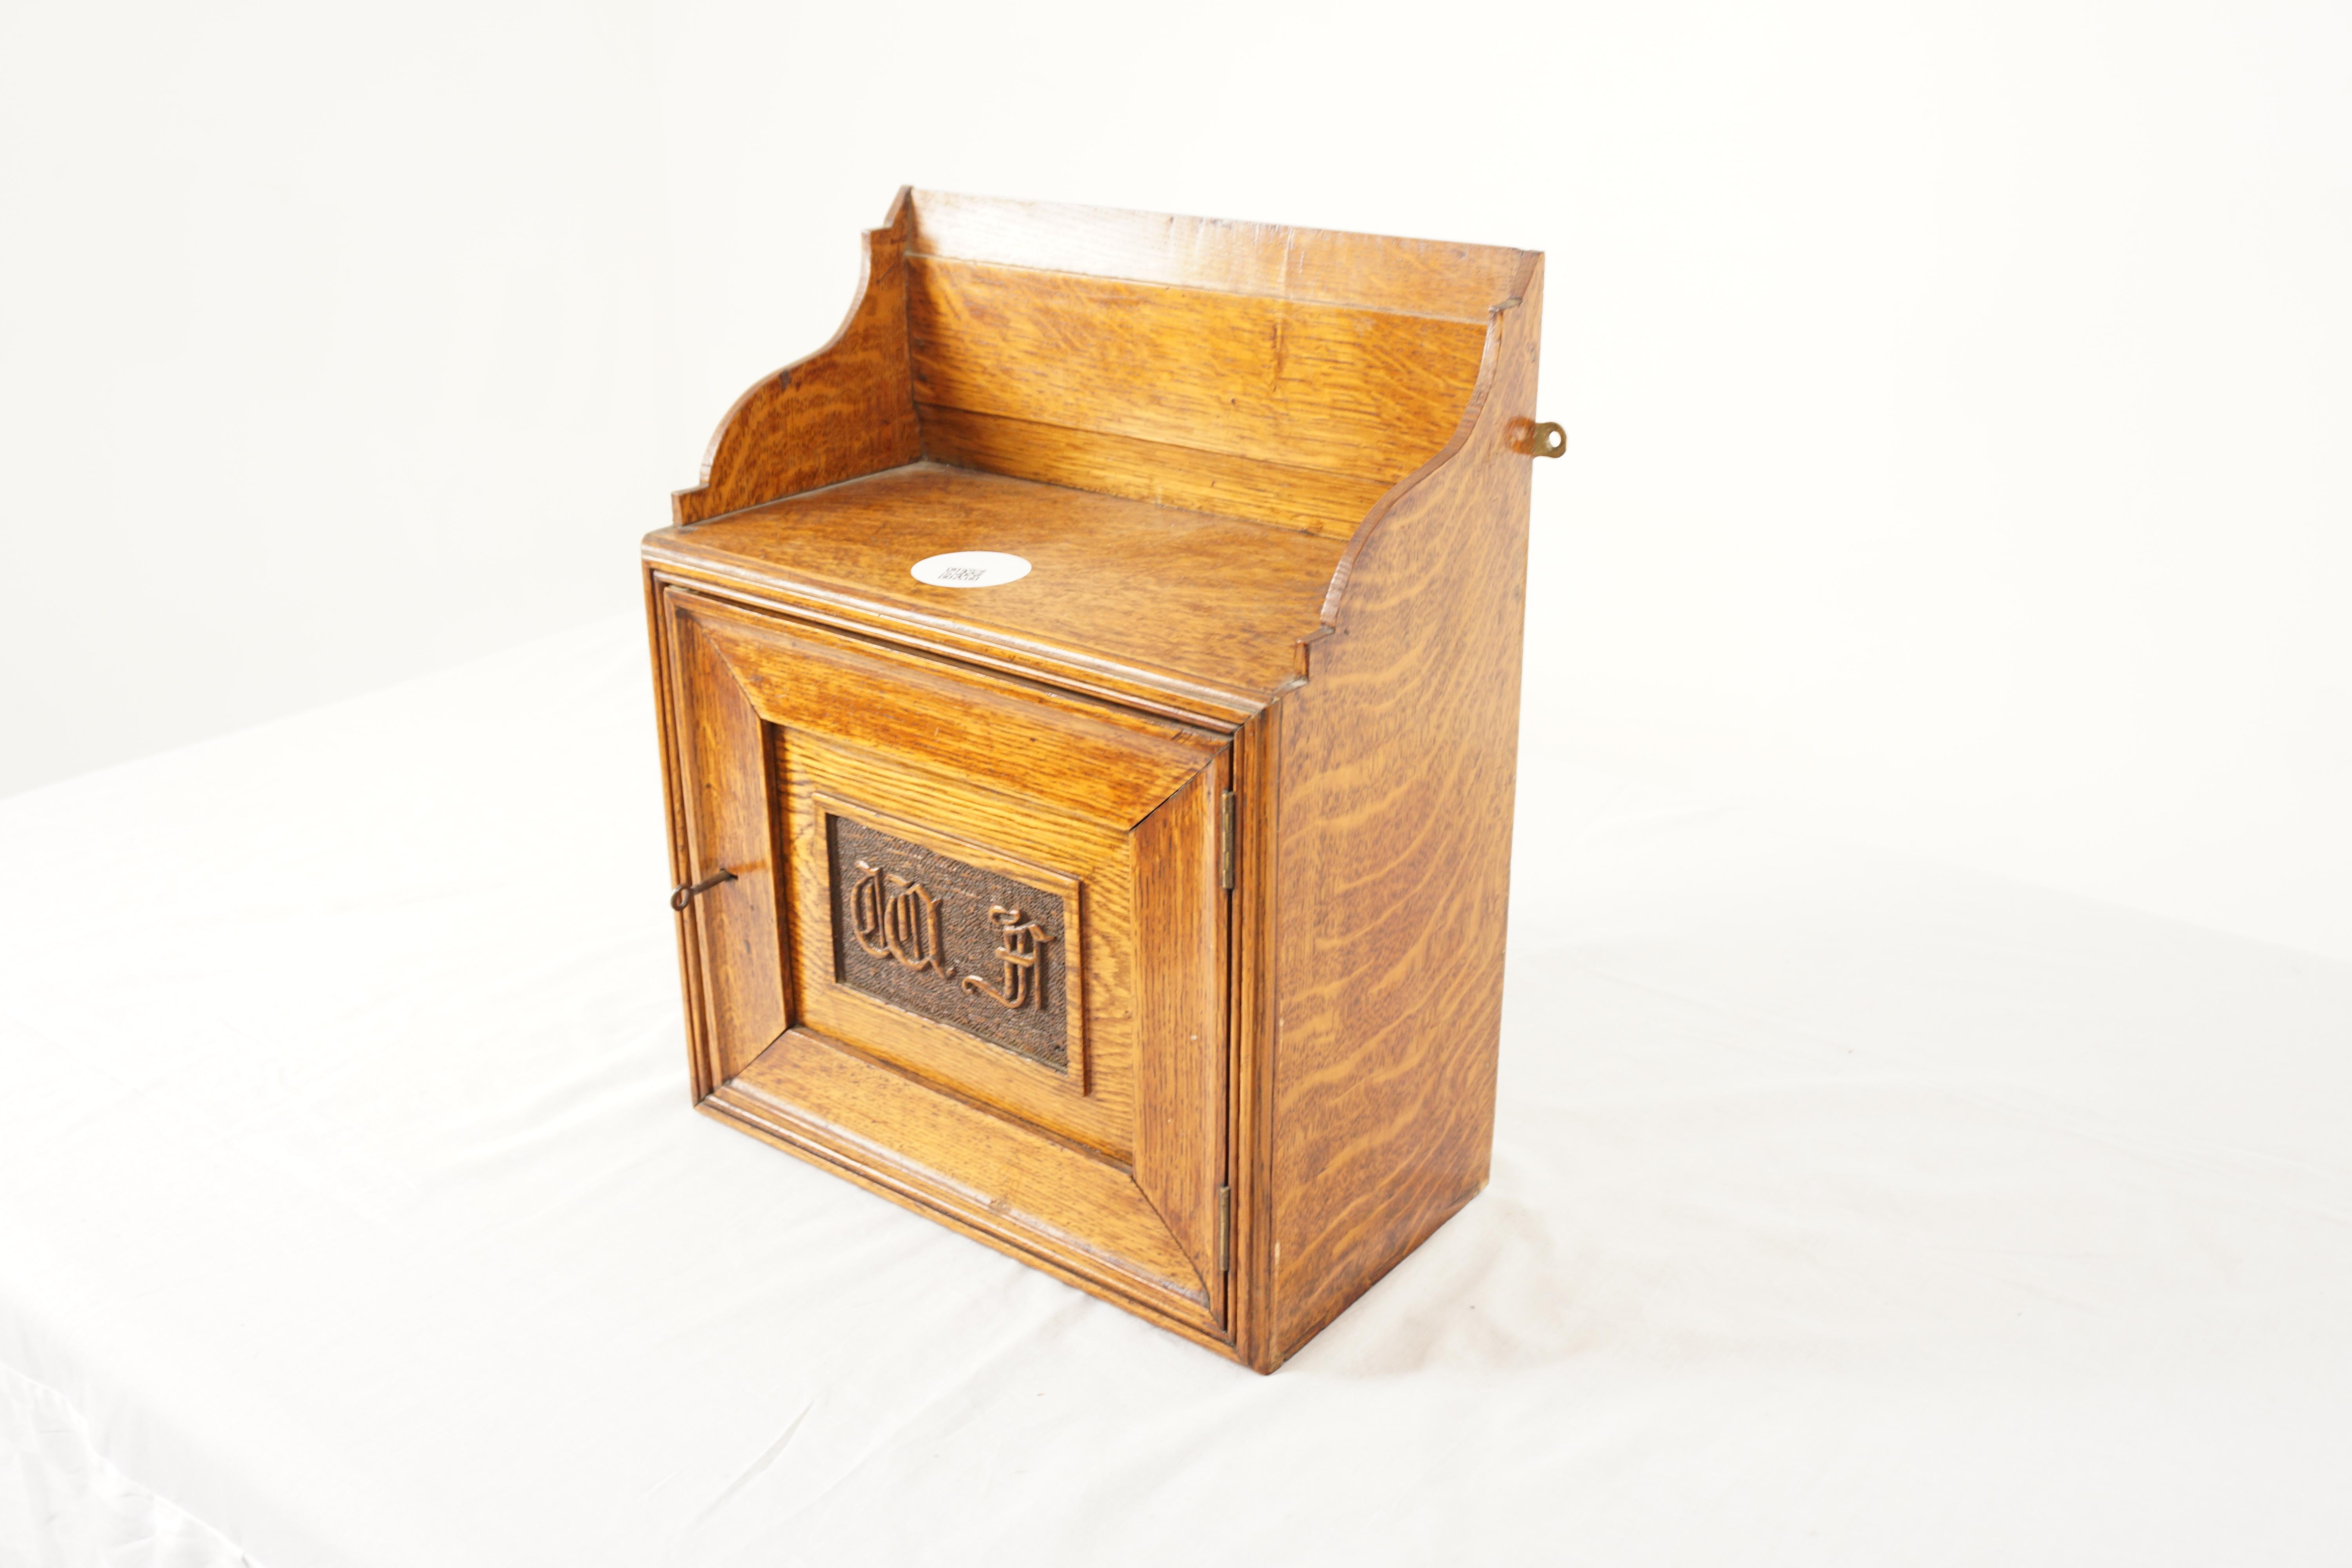 Victorian Tiger Oak Smokers, Collectors Box, Scotland 1900, H1062

Scotland 1900
Solid Oak
Original Finish
Three quarter on top
Single panelled monogram
Door opens to reveal small drawers to the left
With original brass hardware
Open